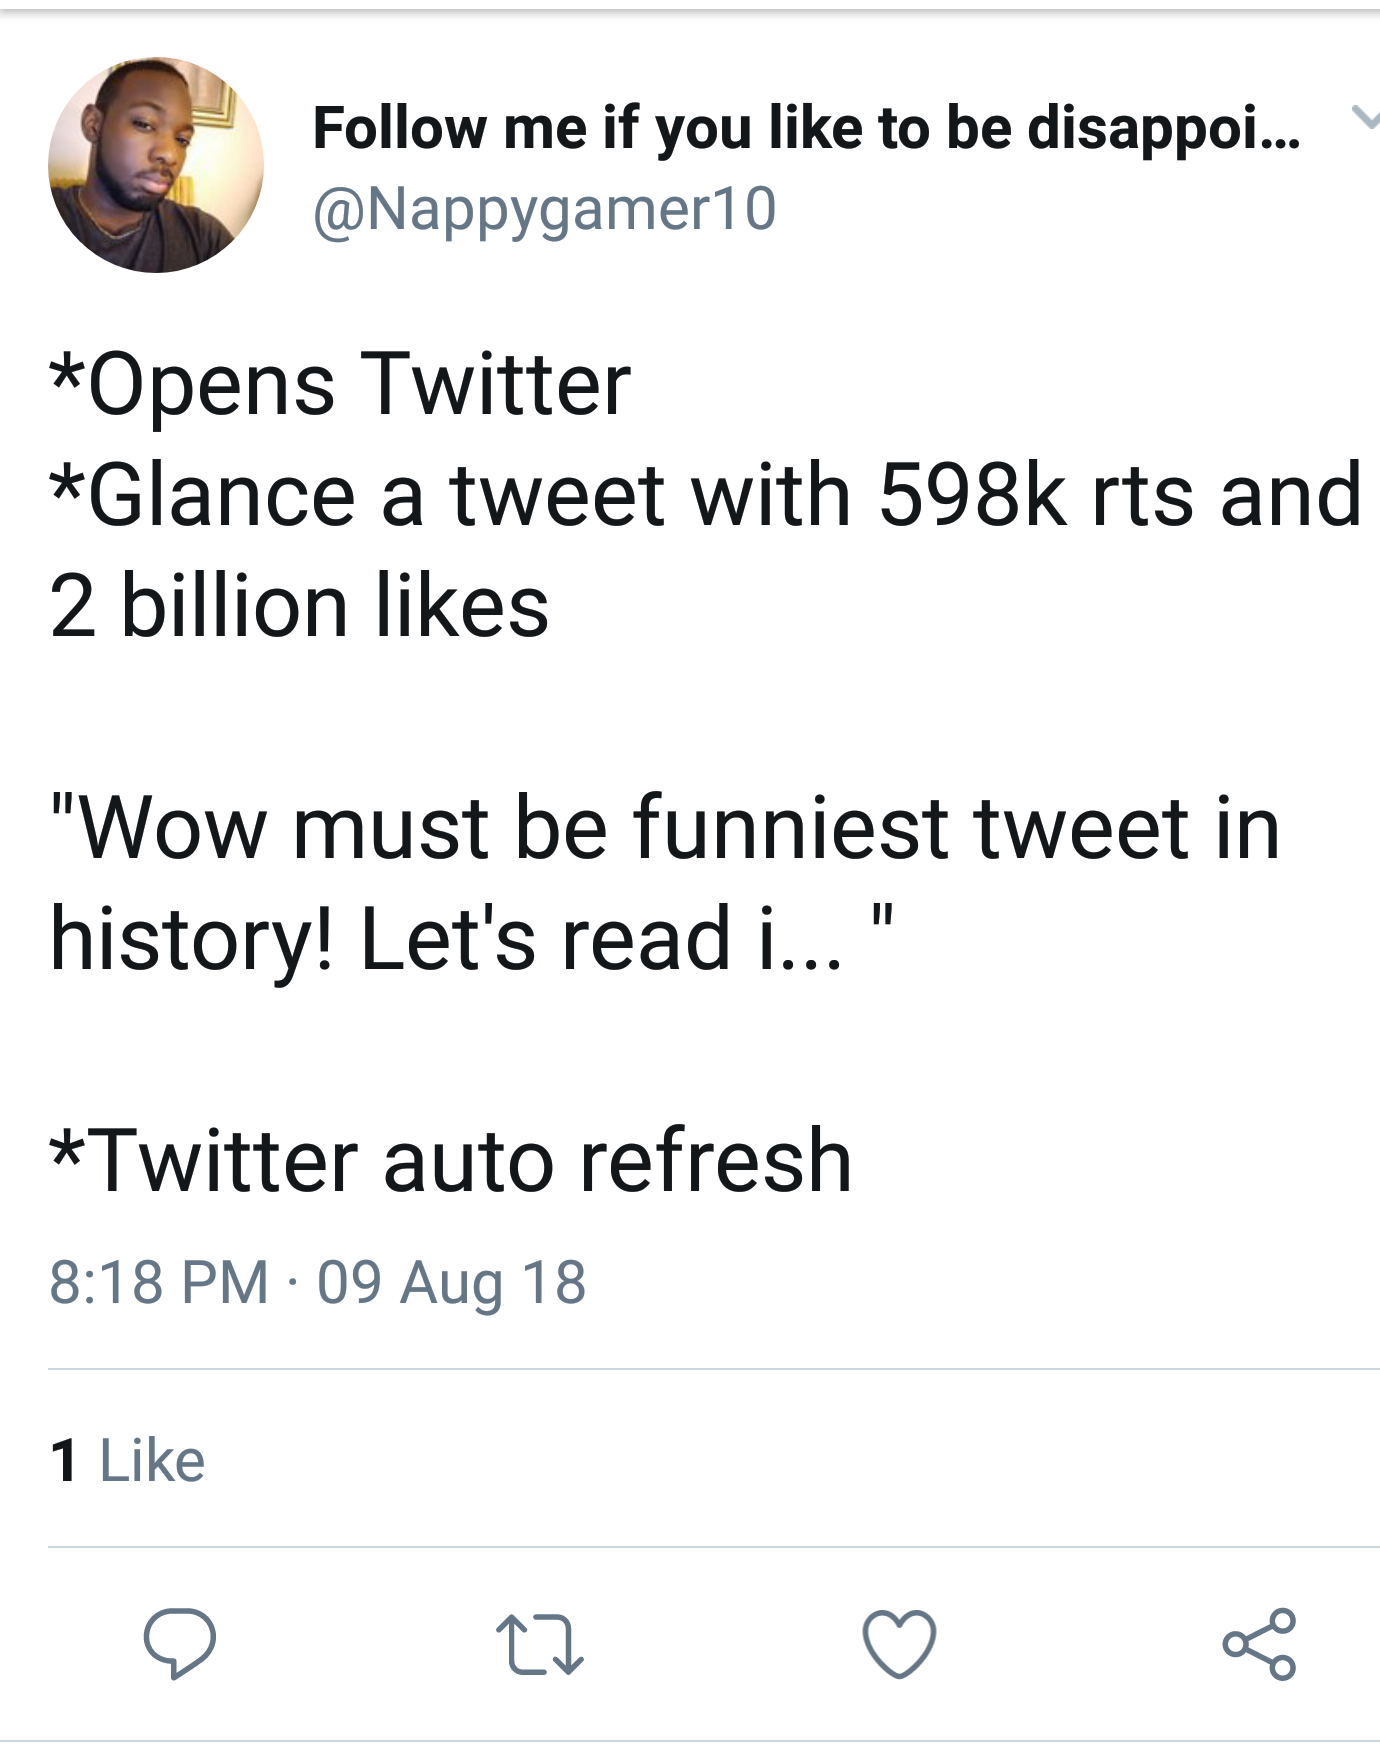 angle - me if you to be disappoi... Opens Twitter Glance a tweet with rts and 2 billion "Wow must be funniest tweet in history! Let's read i... " Twitter auto refresh 09 Aug 18 1